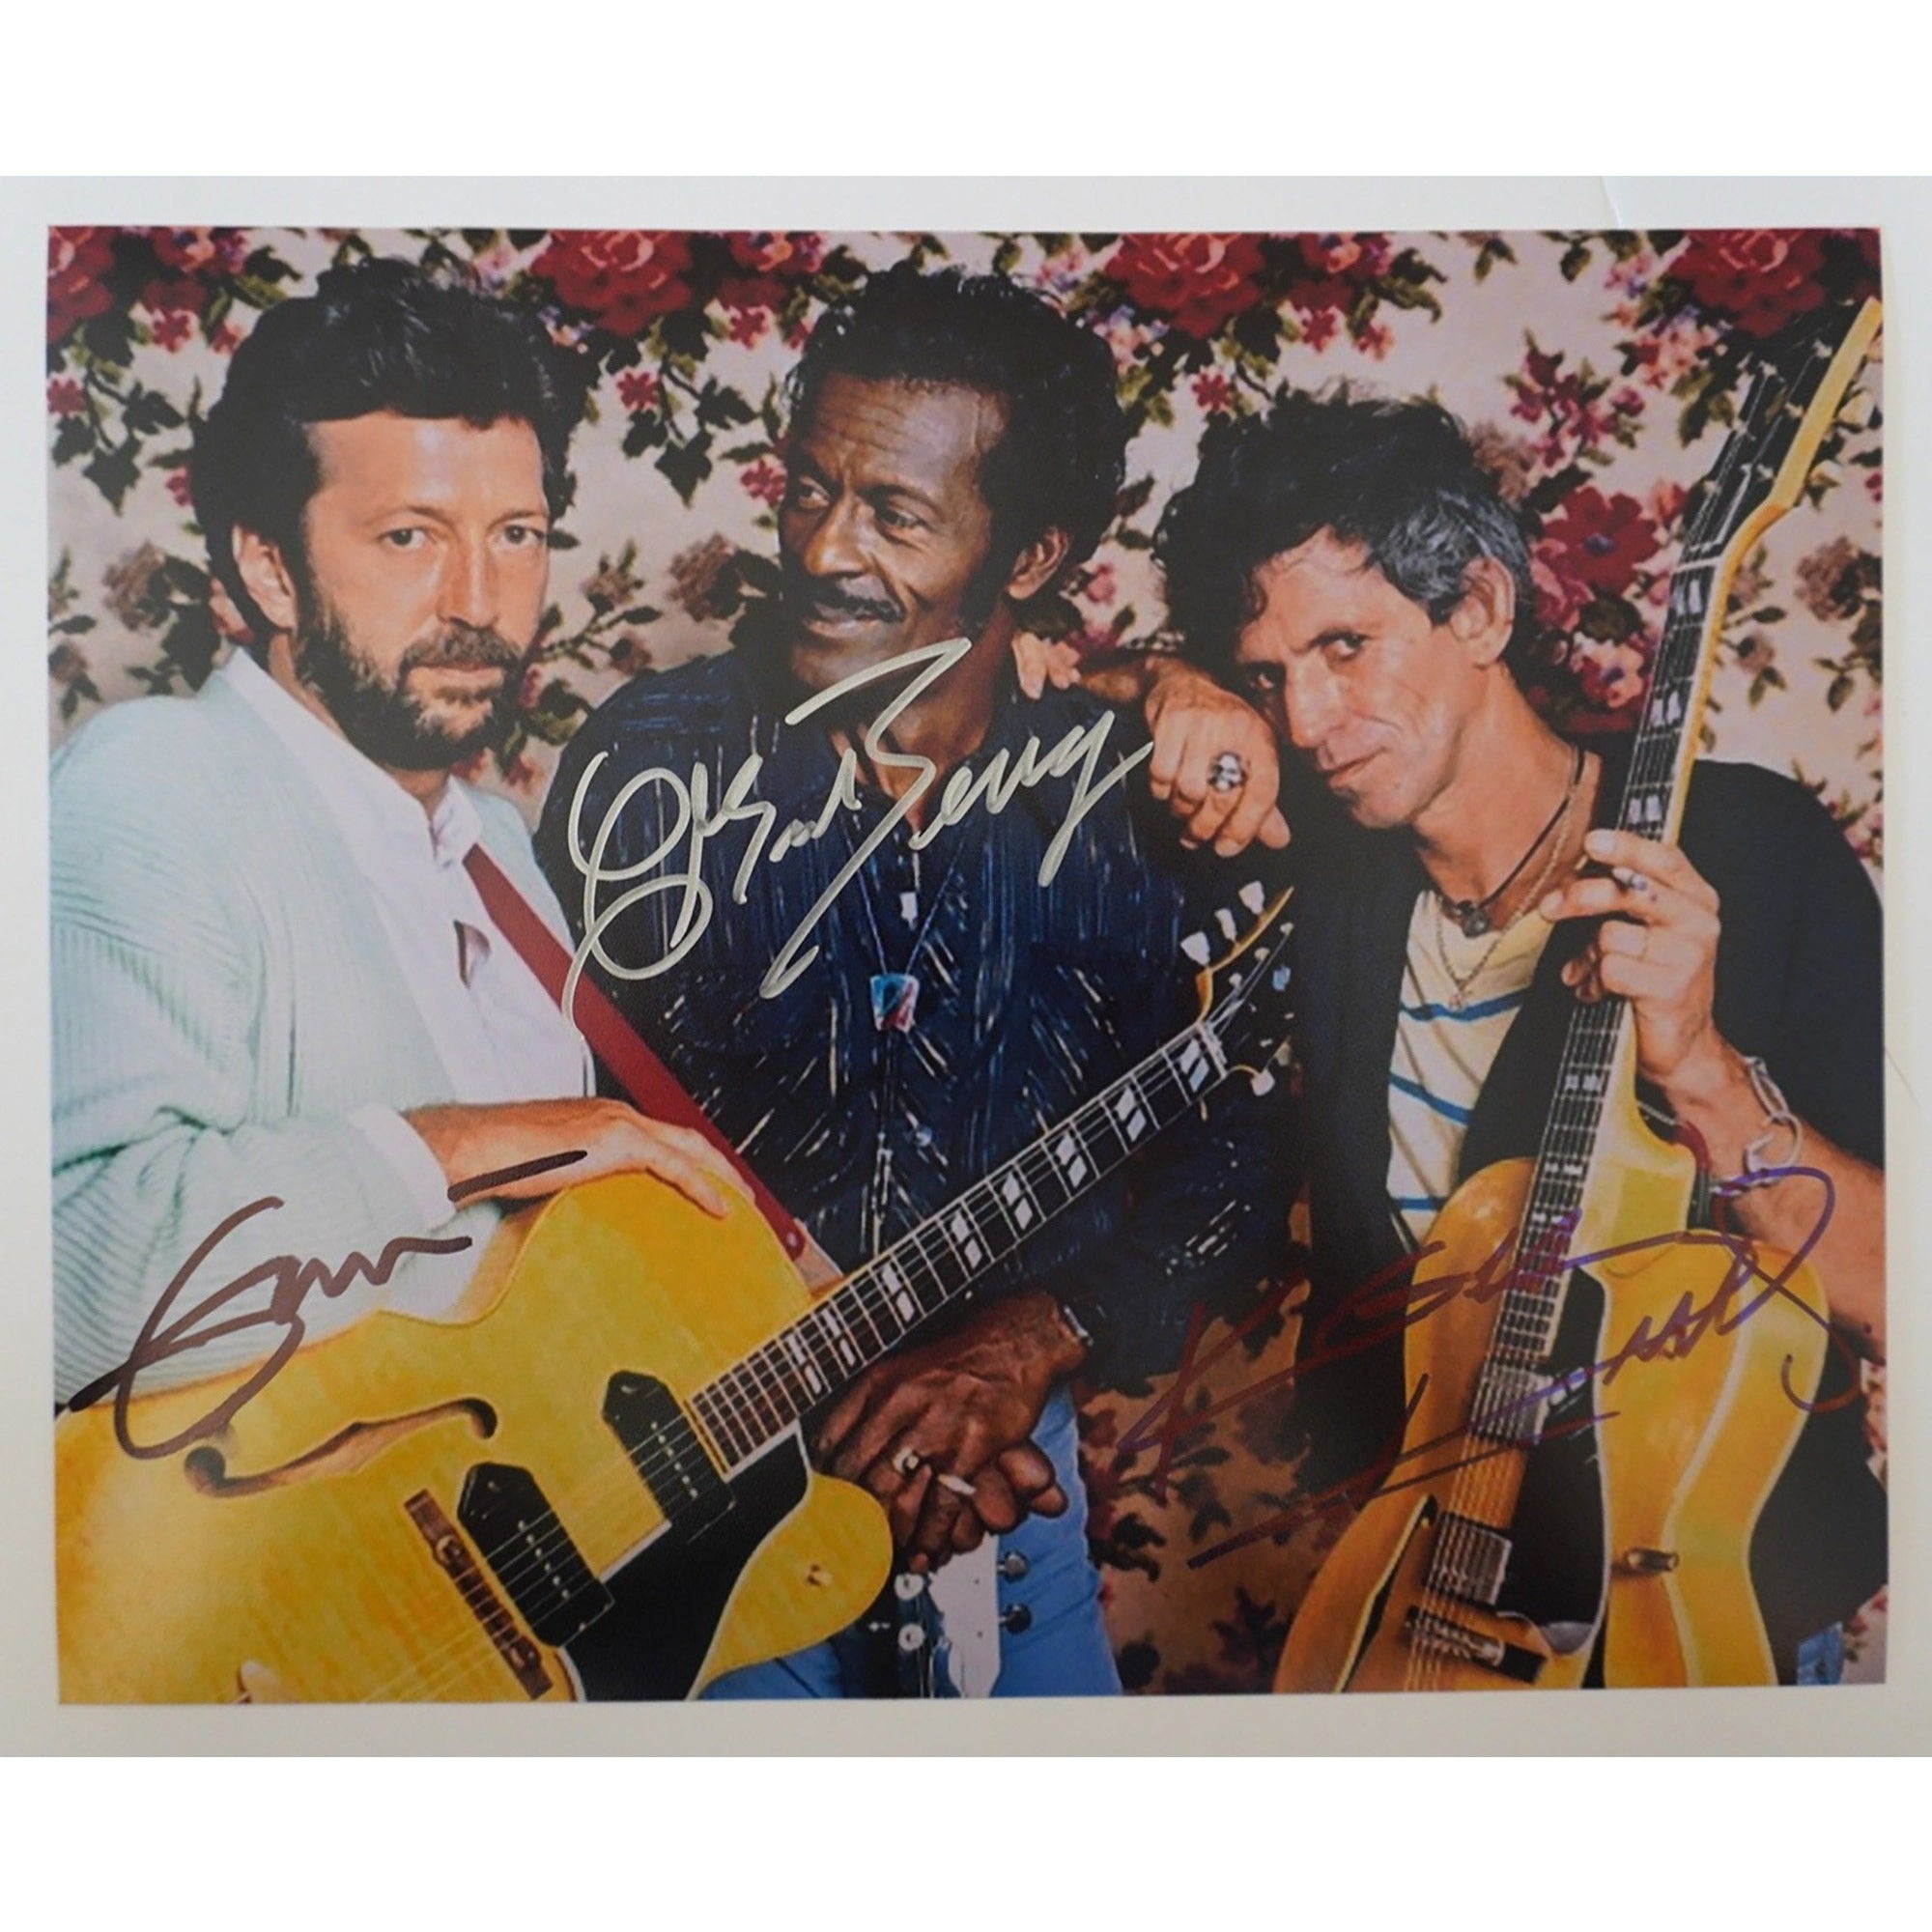 Keith Richards, Eric Clapton, Chuck Berry 8 x 10 signed photo with proof